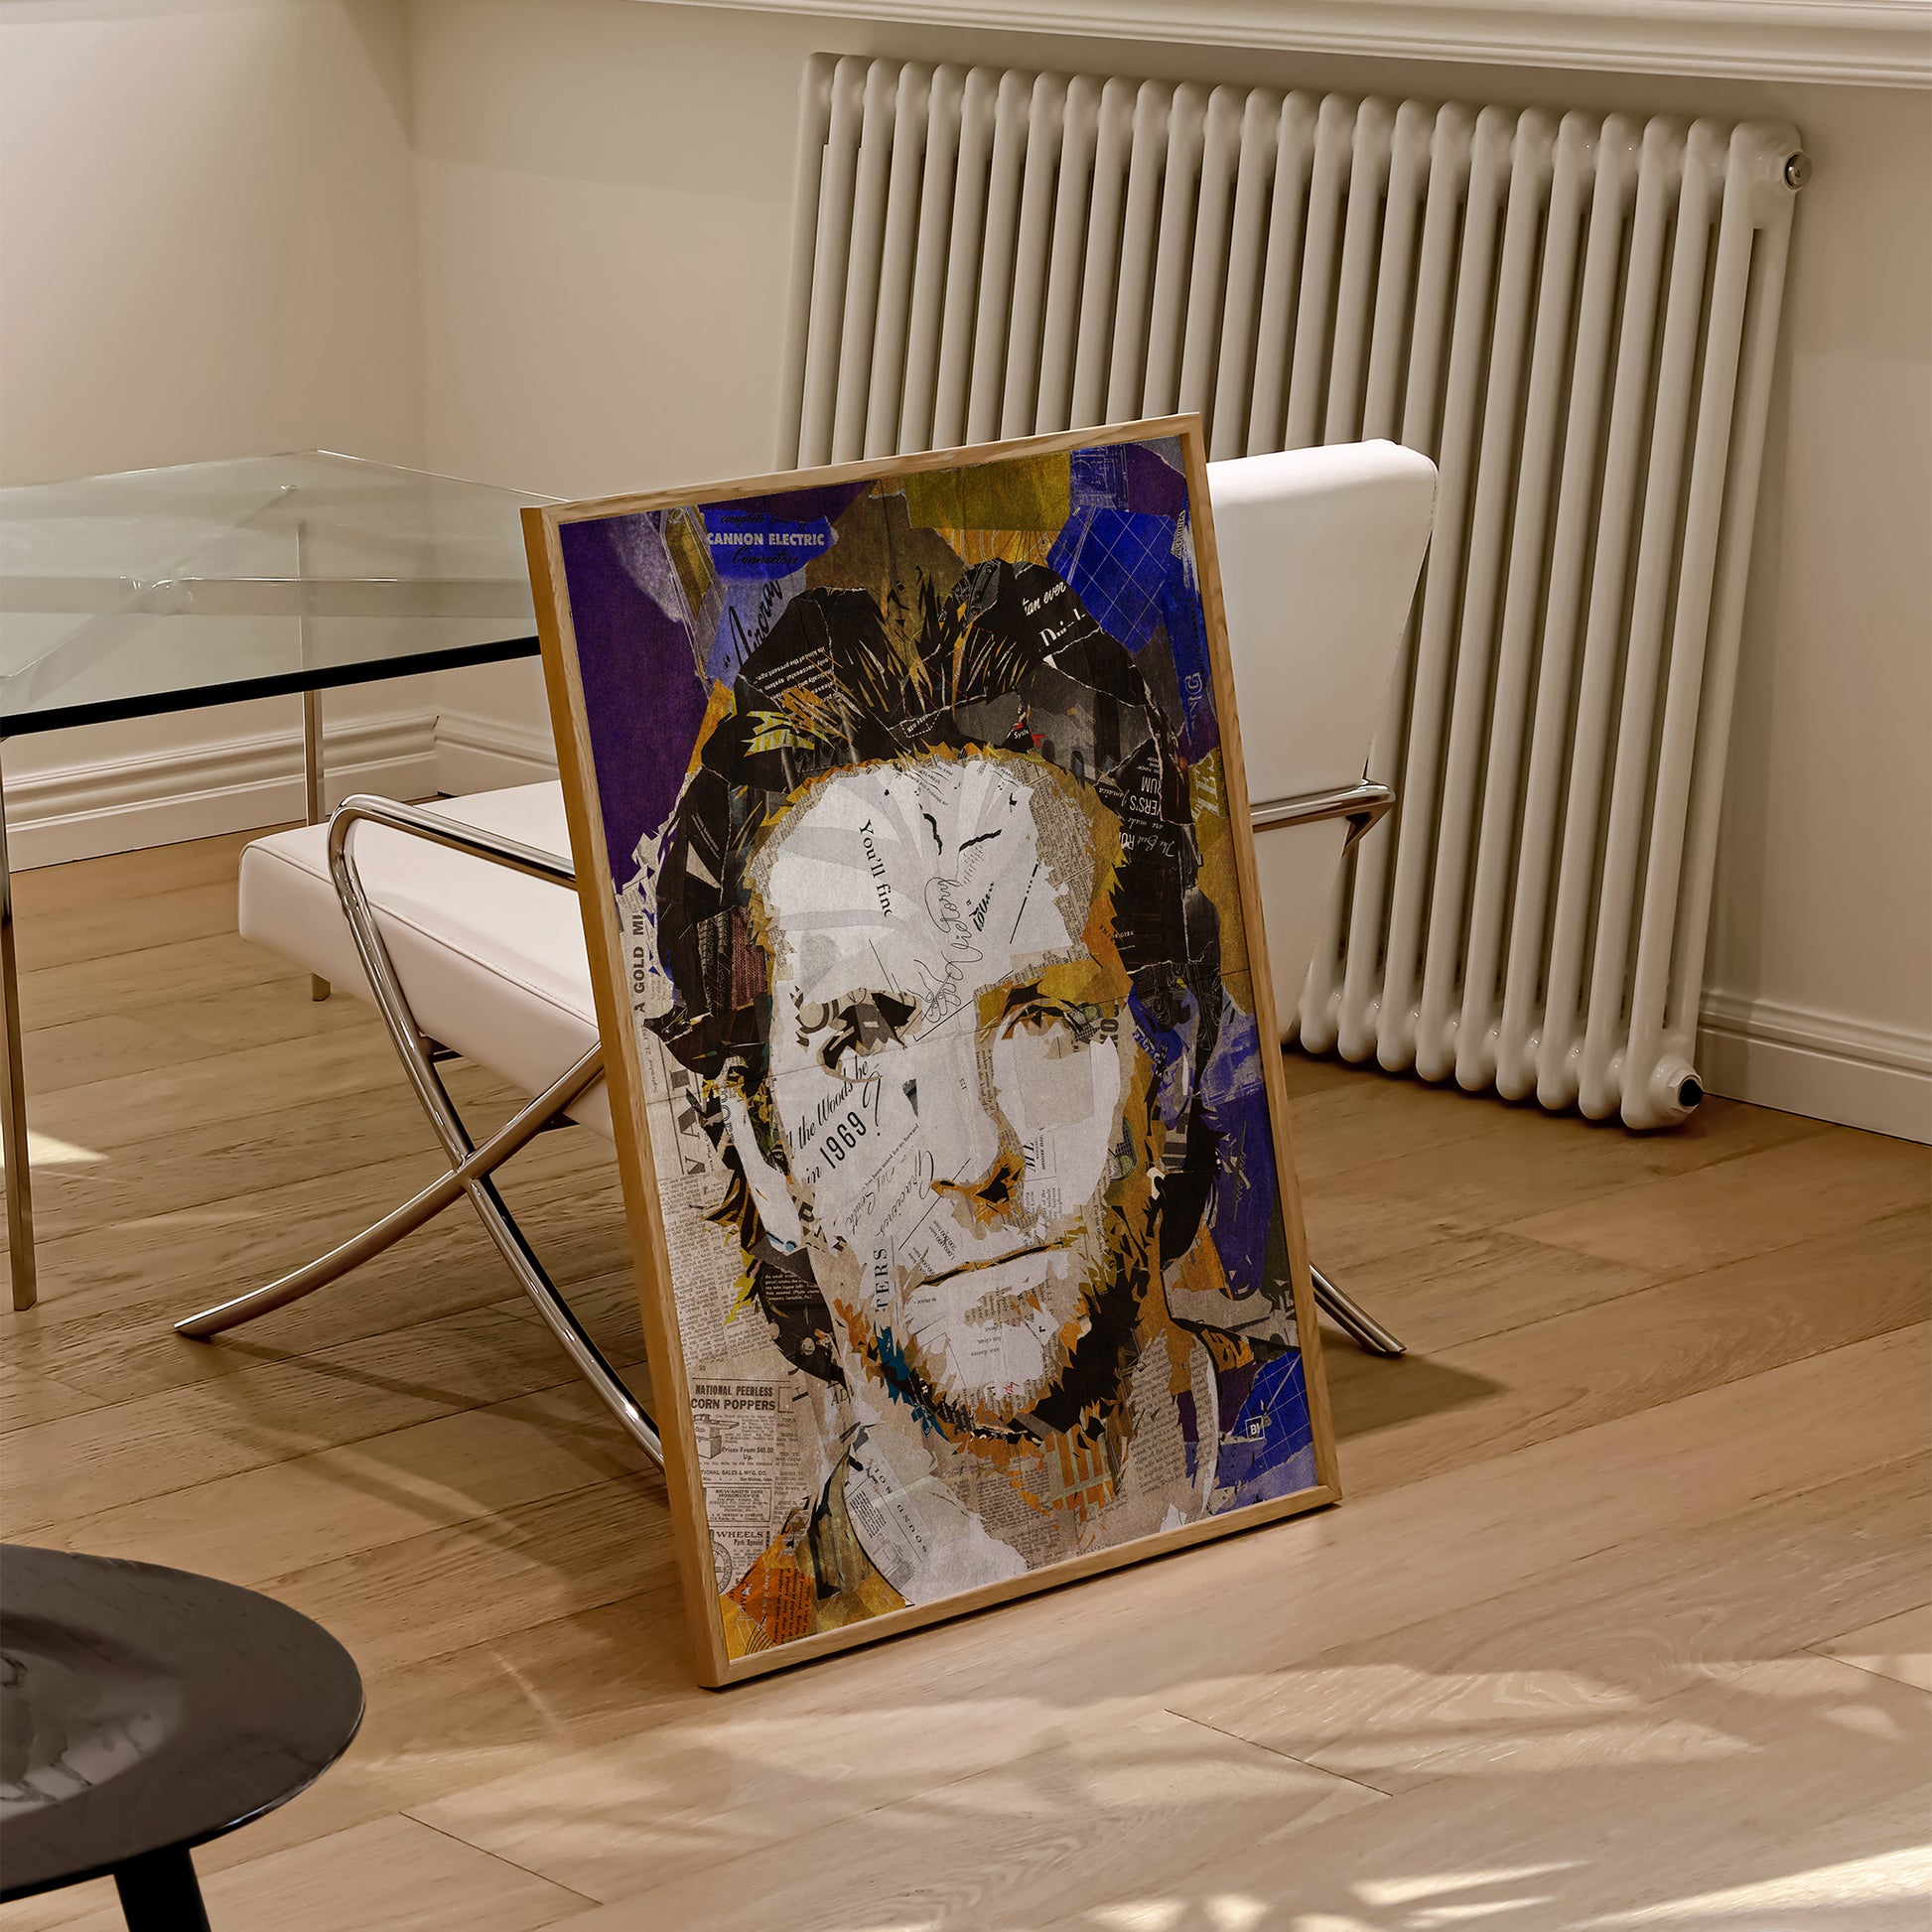 Be inspired by our iconic collage portrait art print of Bradley Cooper. This artwork was printed using the giclée process on archival acid-free paper and is presented in a natural oak frame, capturing its timeless beauty in every detail.